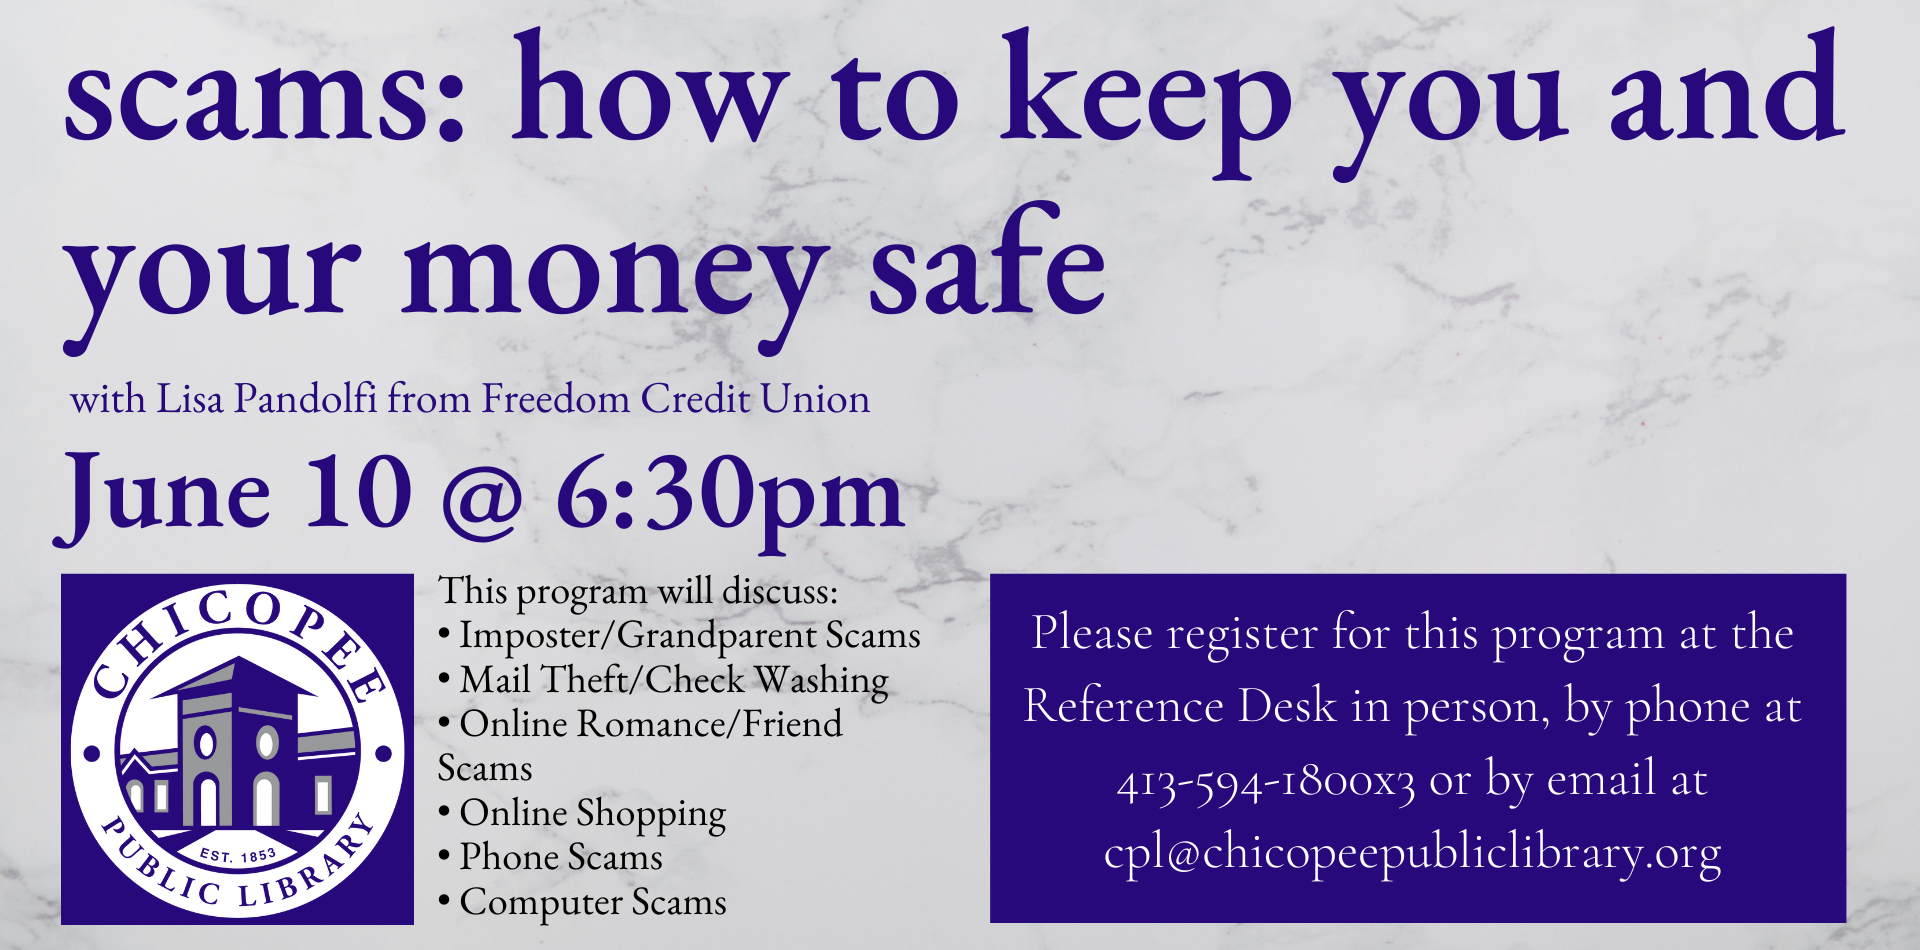 Learn how to keep safe from scams and fraud on June 10 at 6:30pm. Registration required.